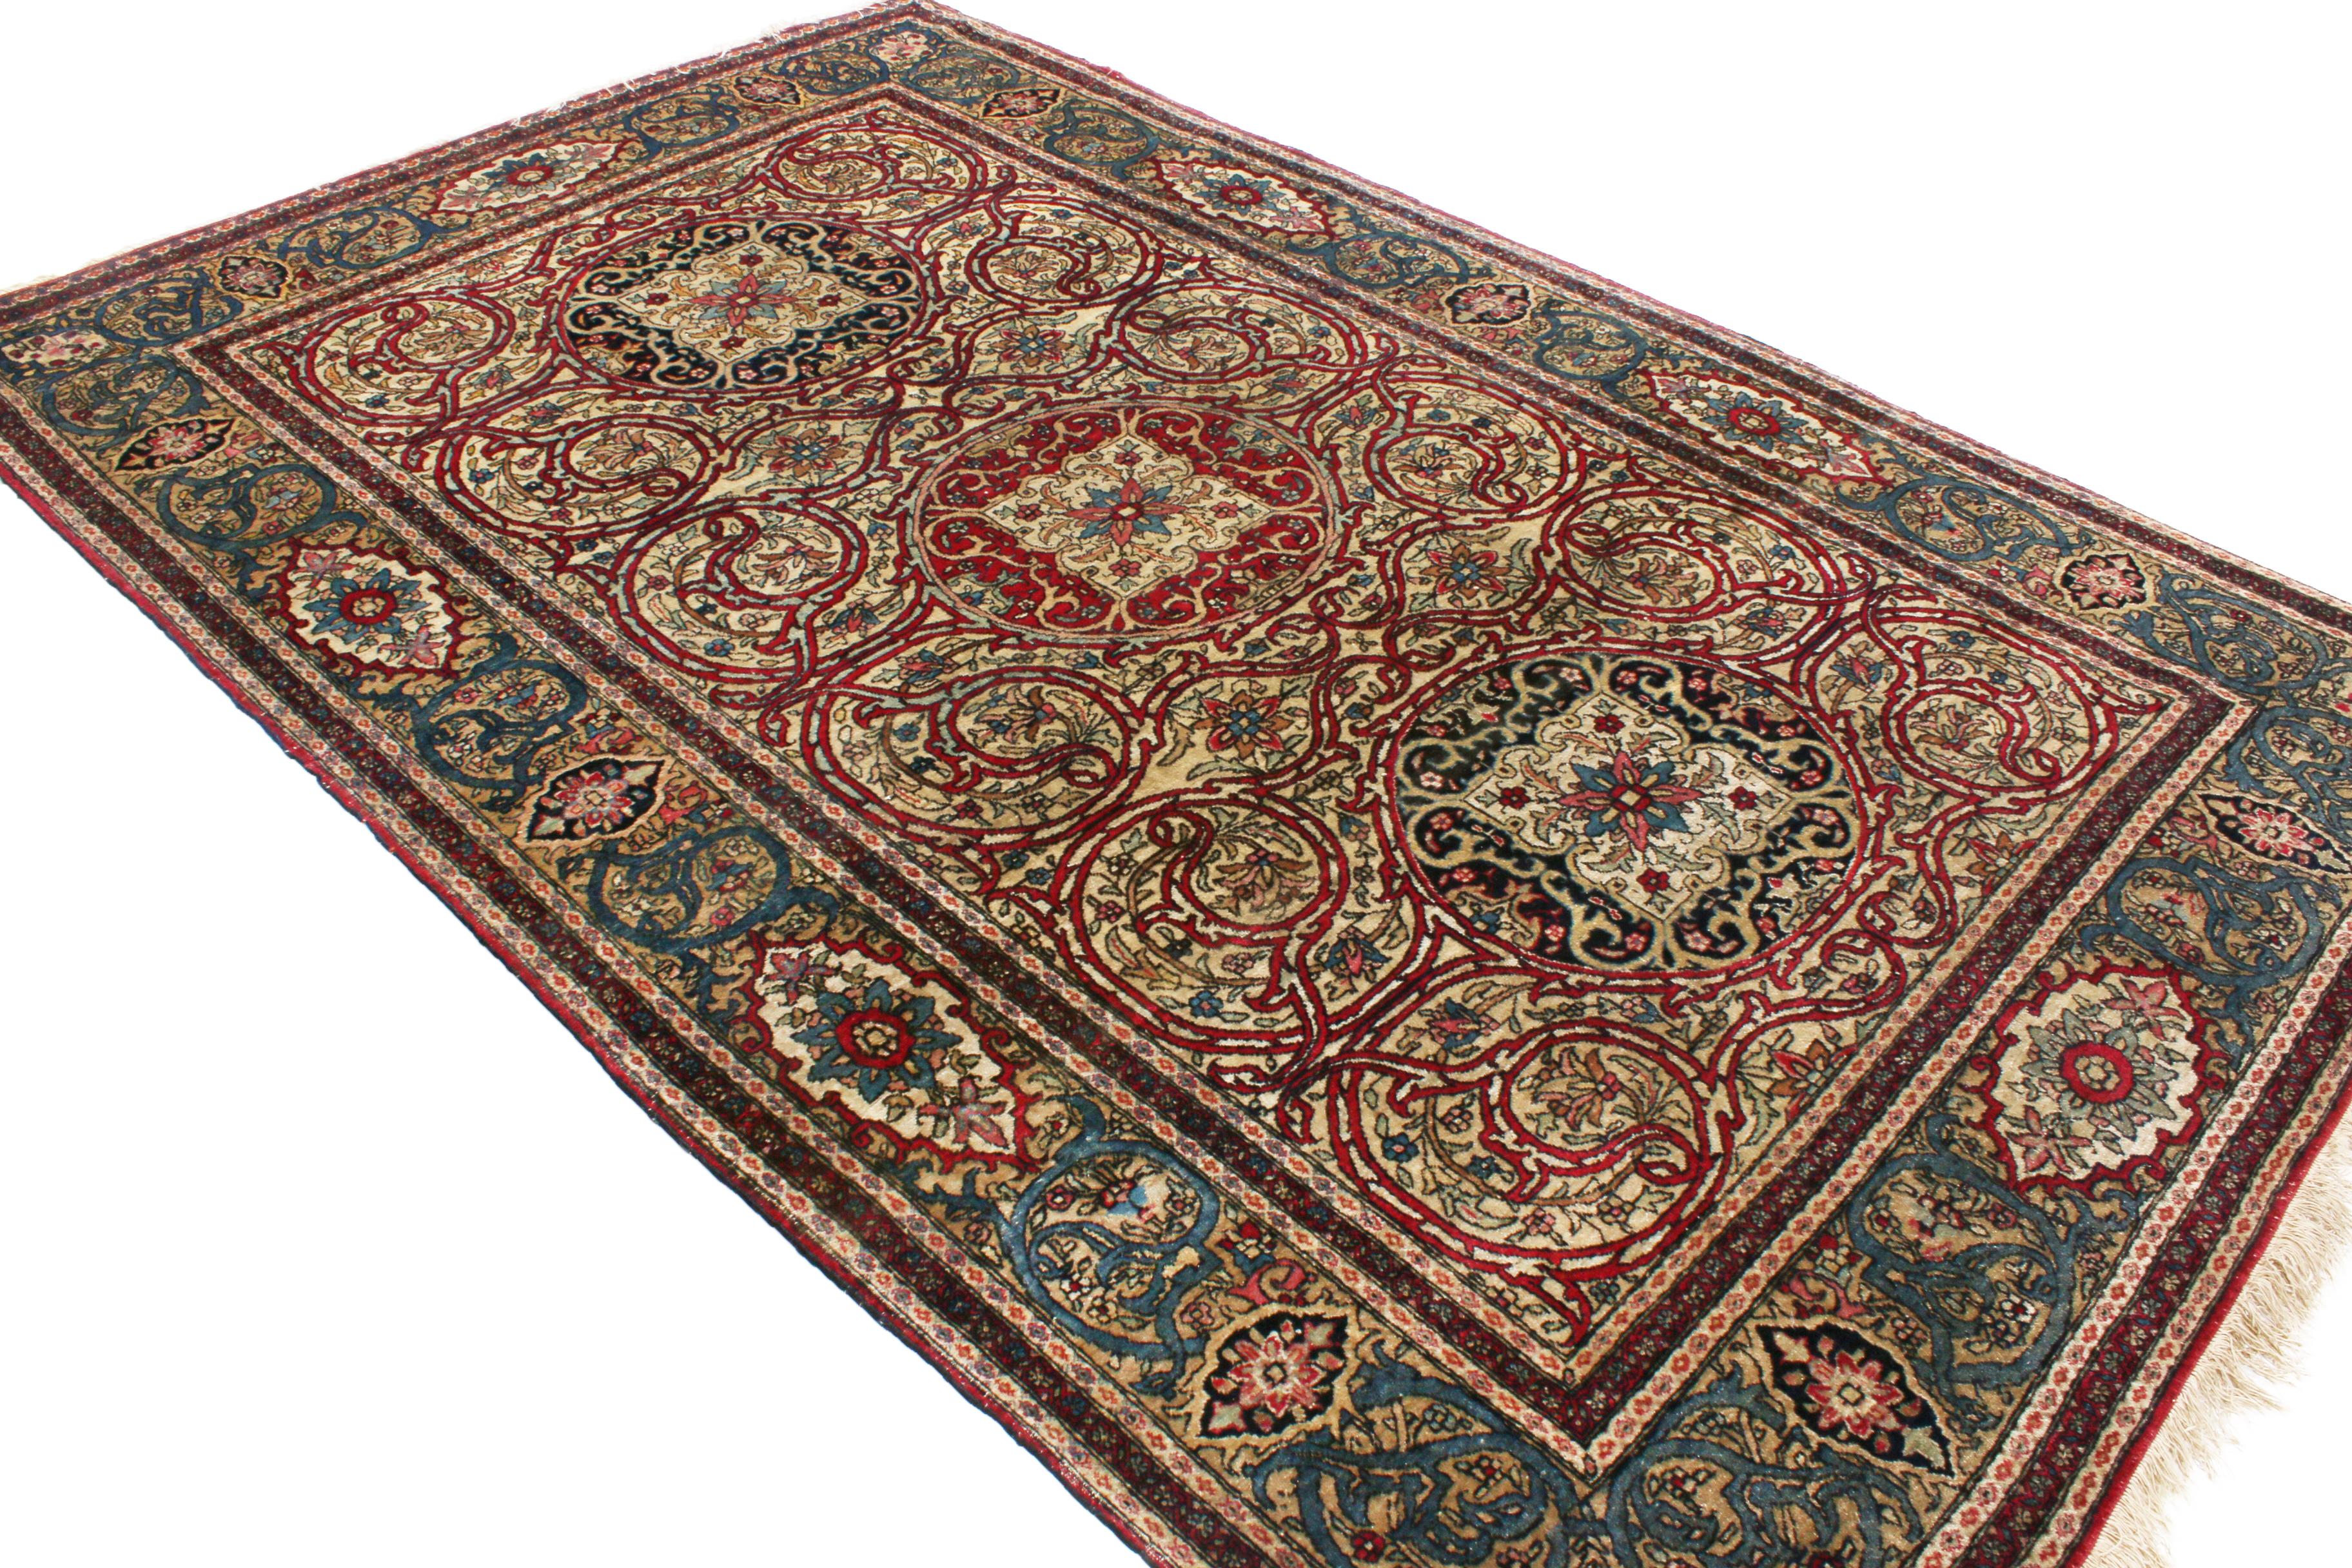 Hand-Knotted Antique Isfahan Red and Golden Beige Wool Persian Rug